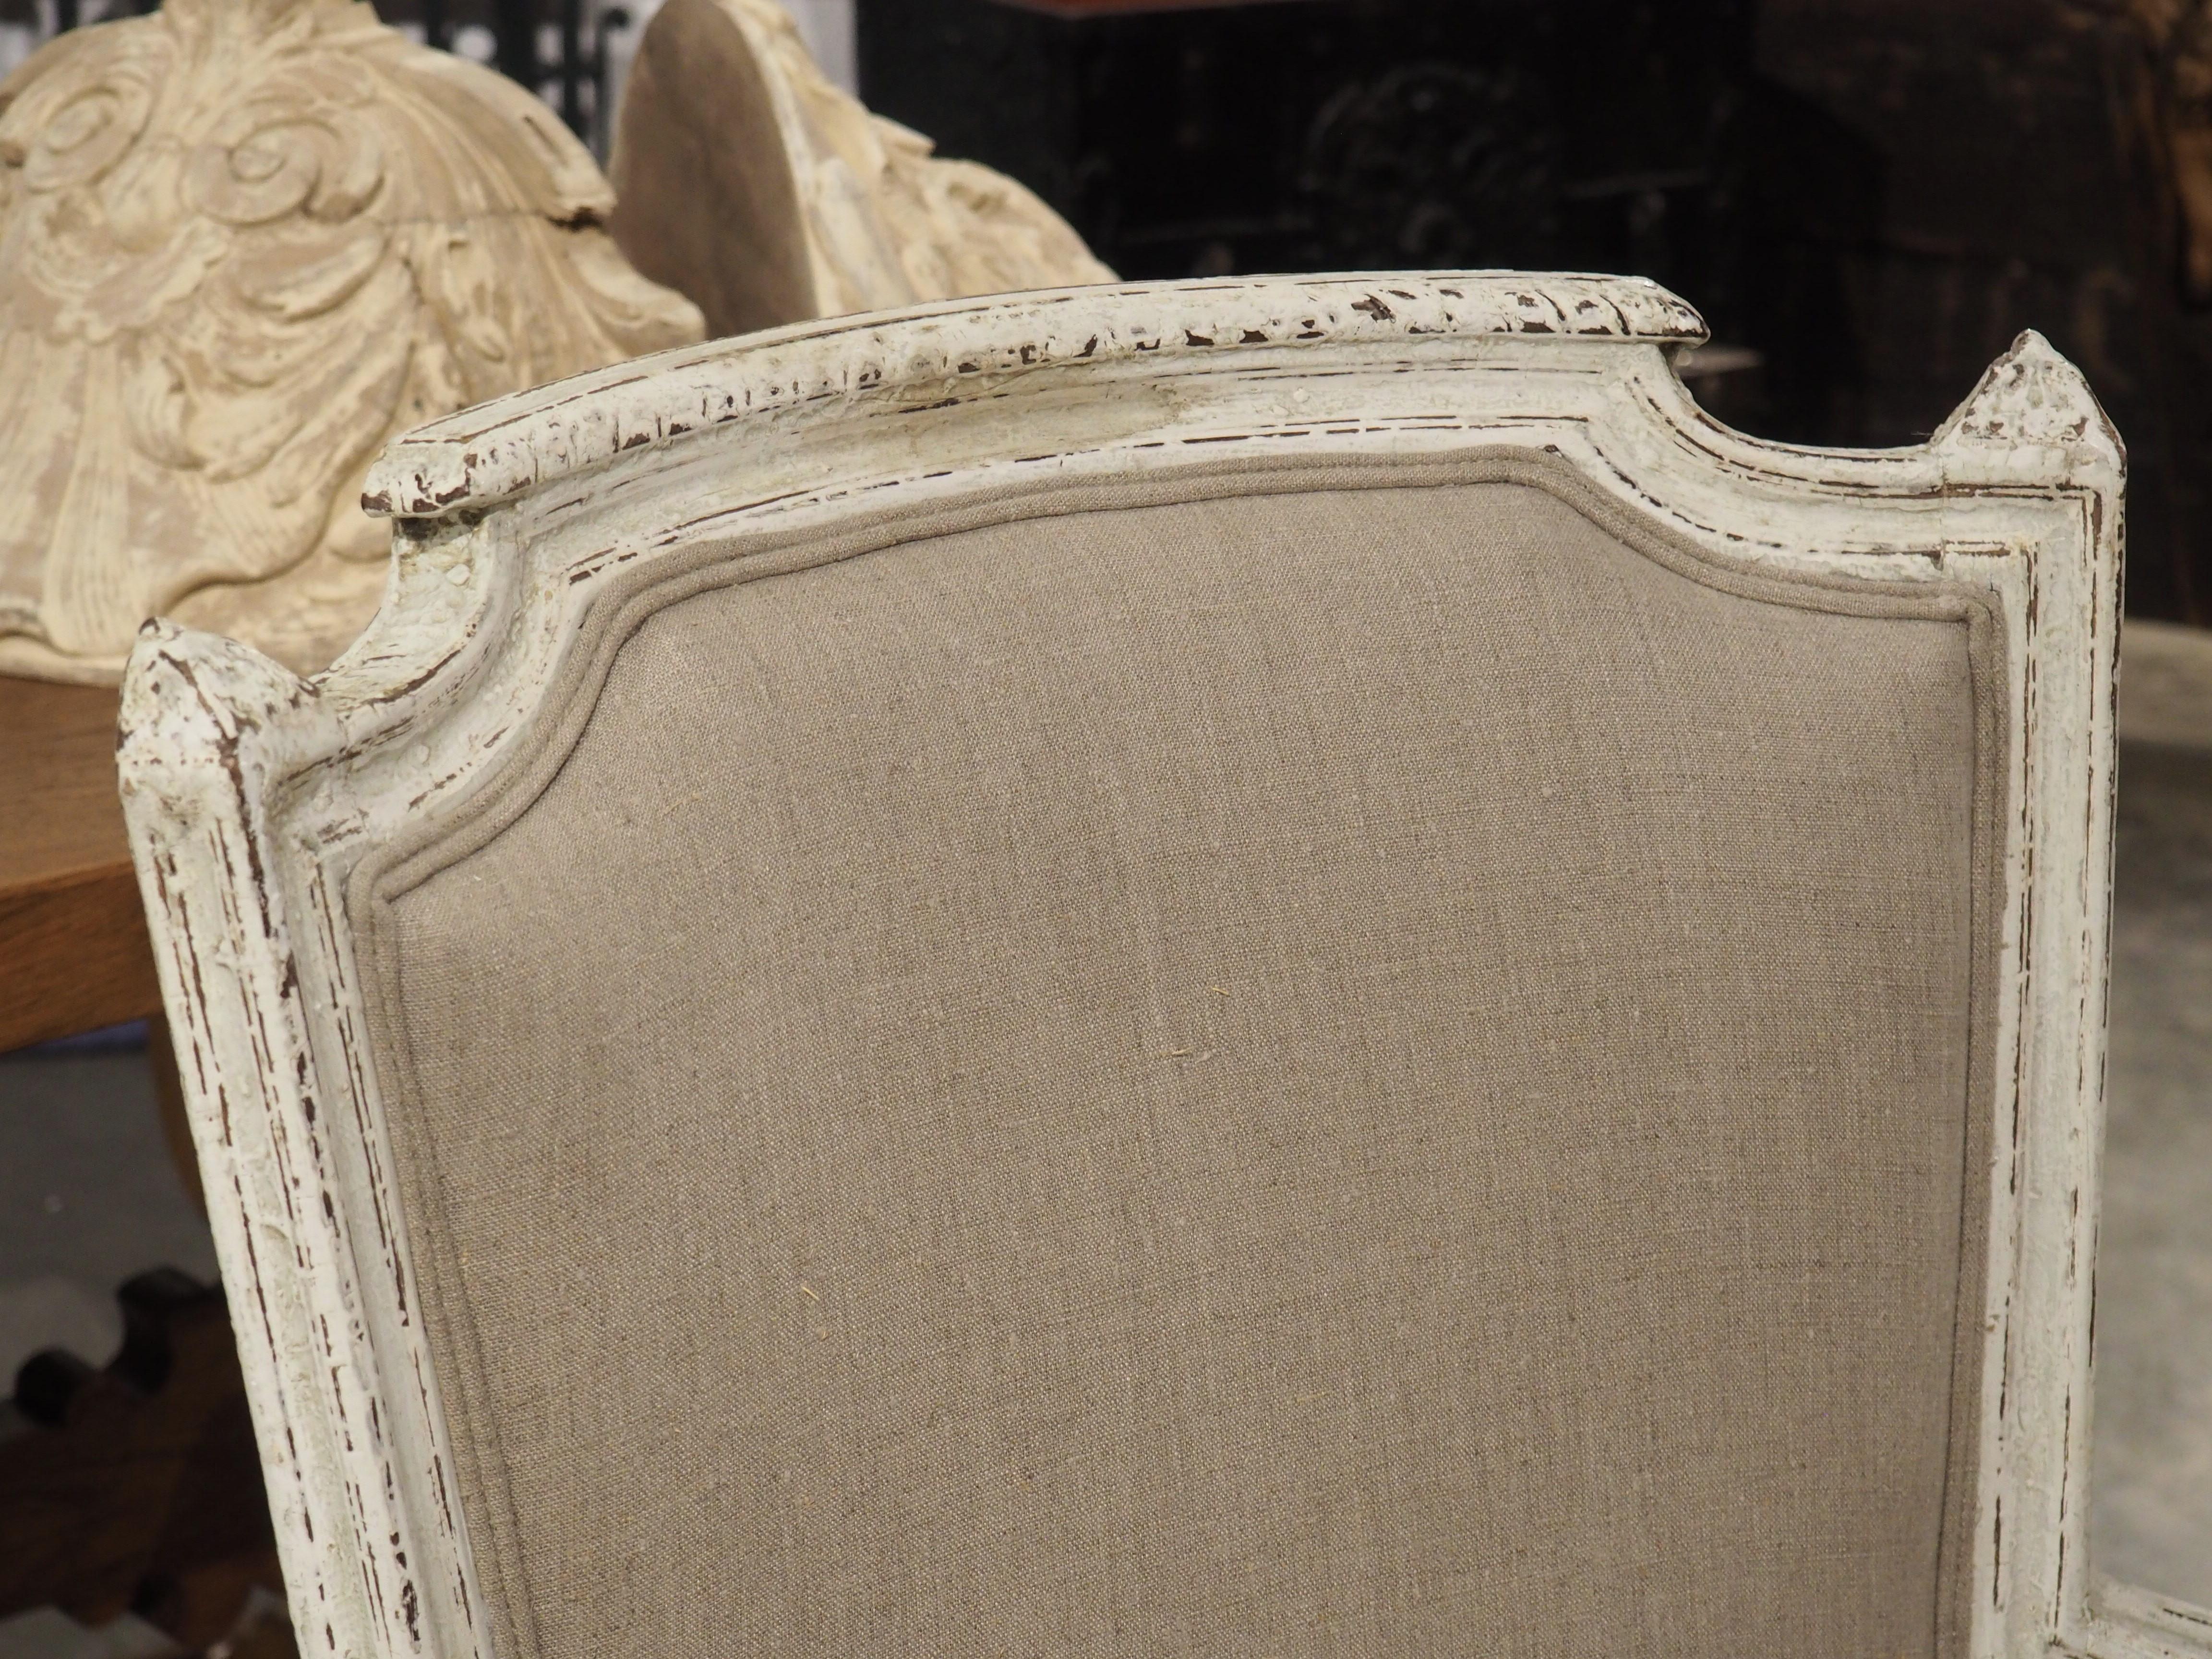 The period of French history known as Directoire was a difficult time, as it arrived at the end of the Revolutionary War. Furnishings in this style, such as our pair of painted armchairs (circa 1900), were less ornate than offerings from past